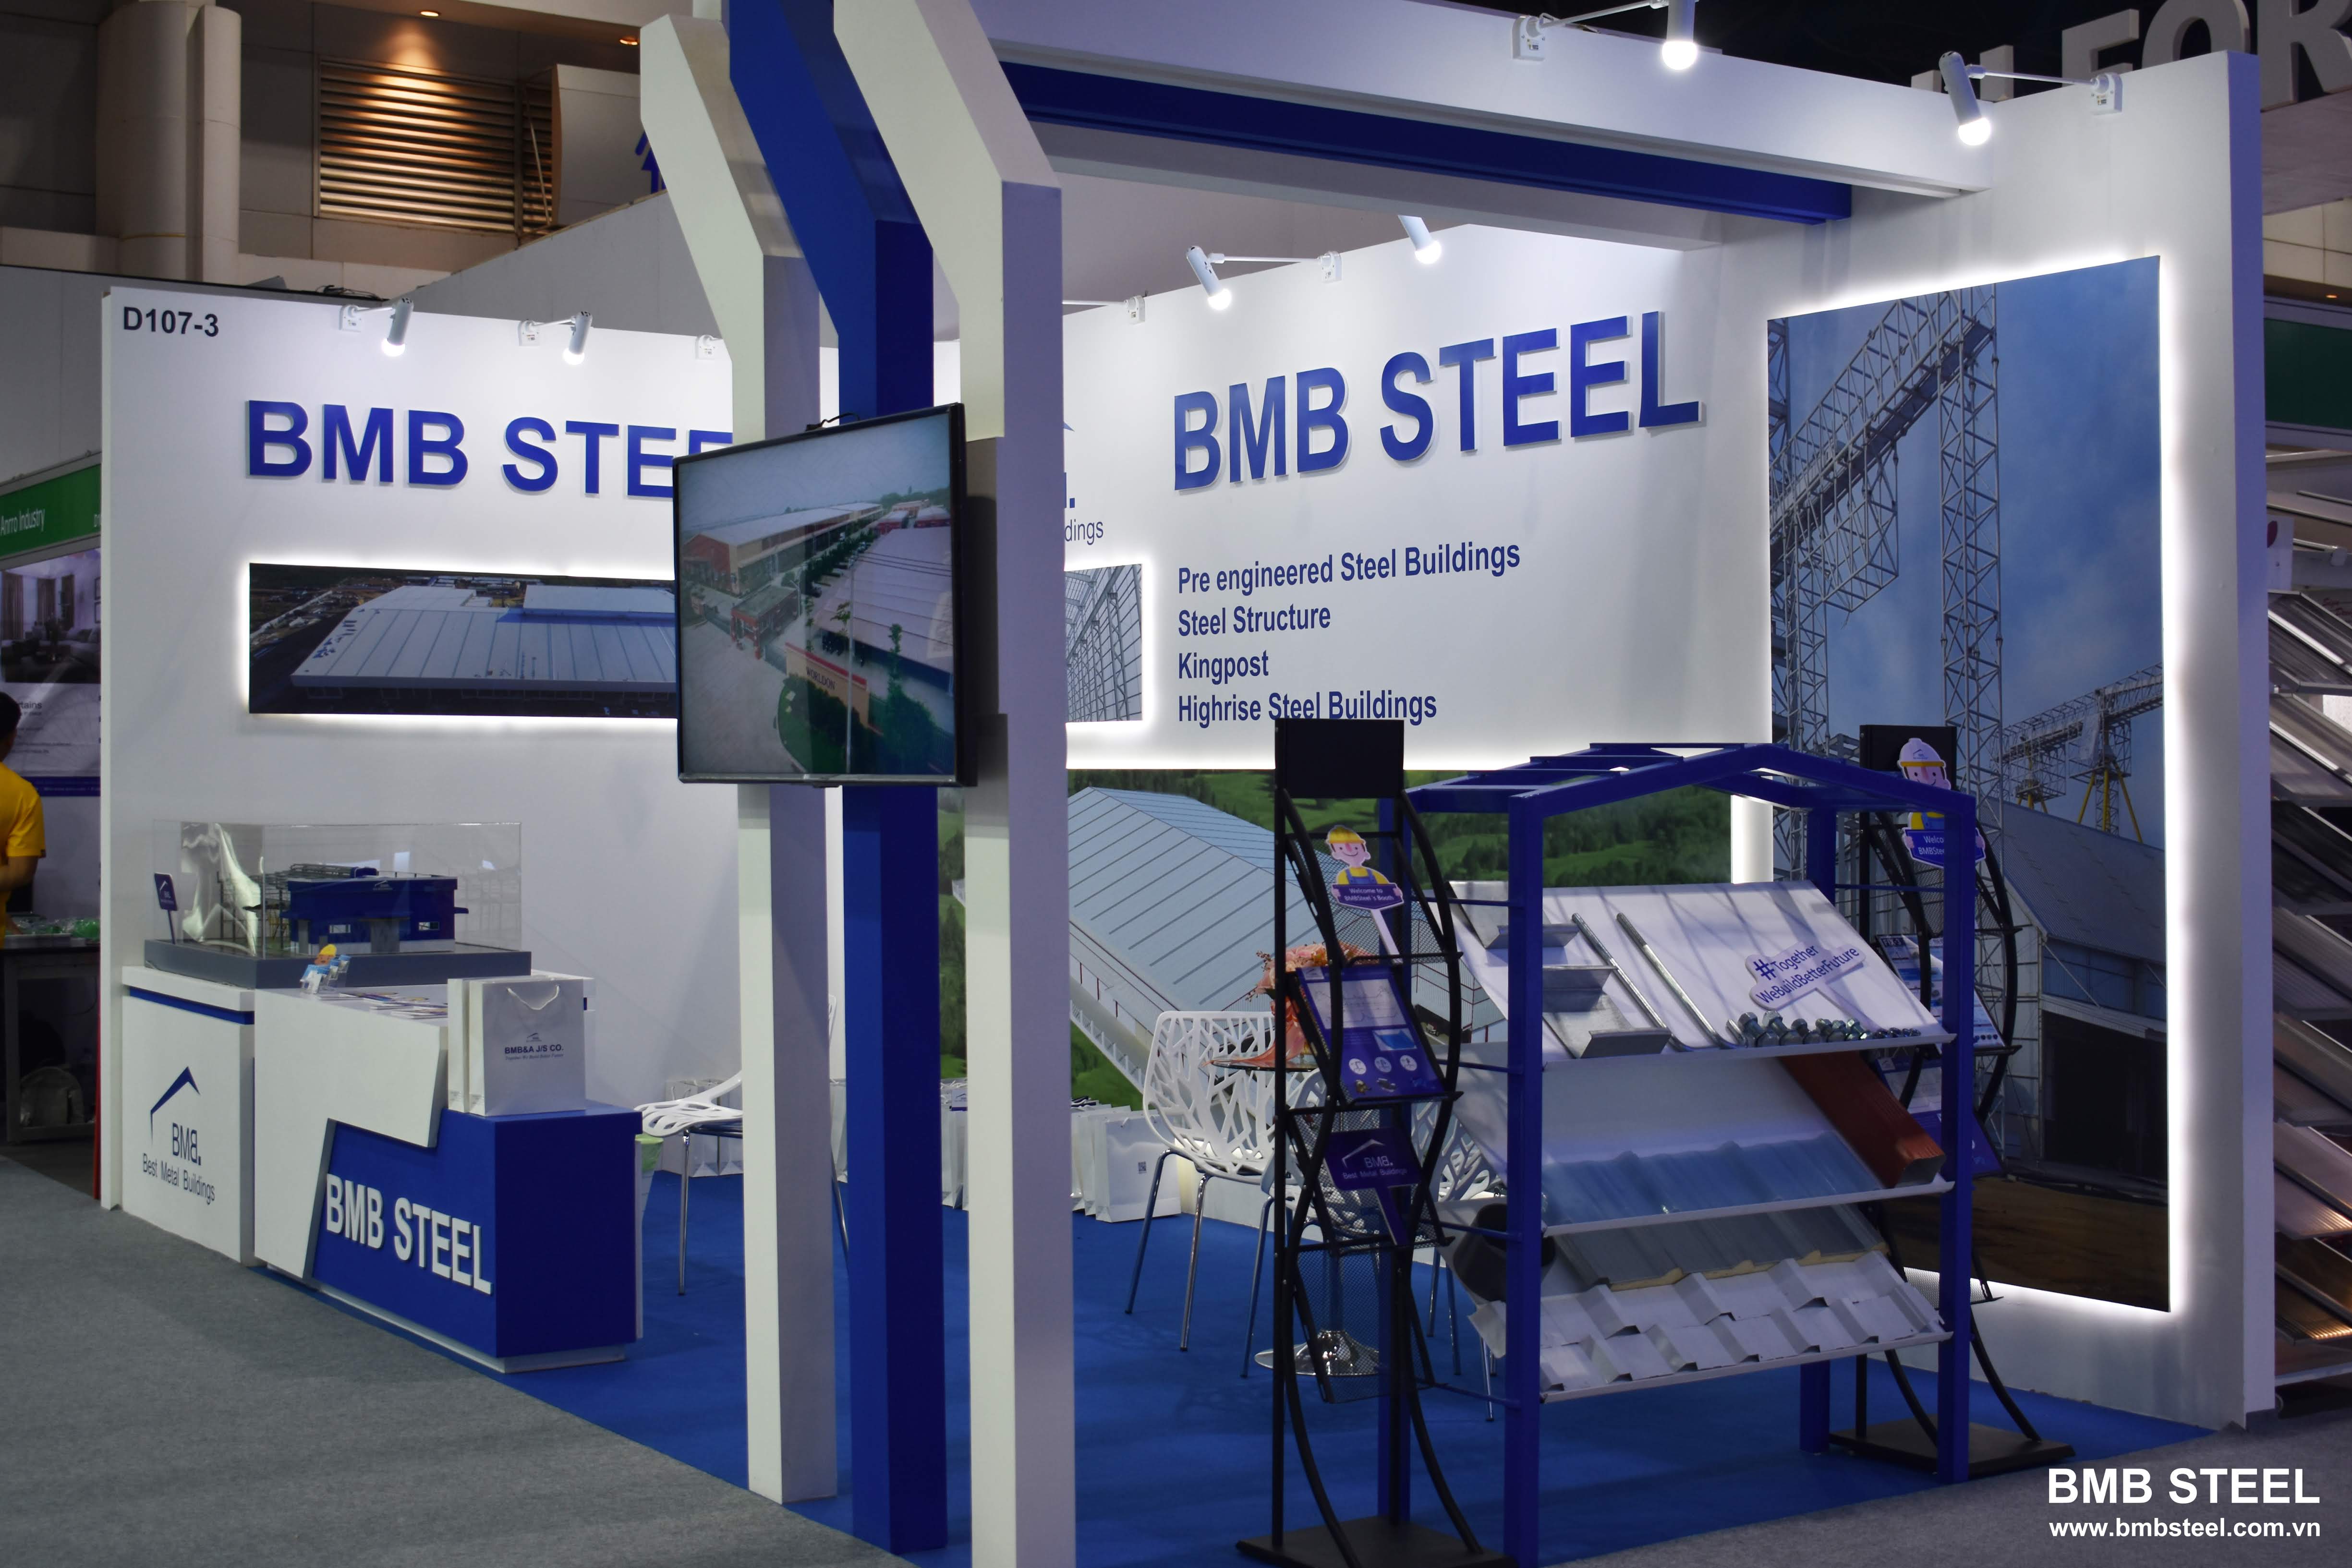 BMB Steel participated in Thai Architect'19 expo in Thailand4